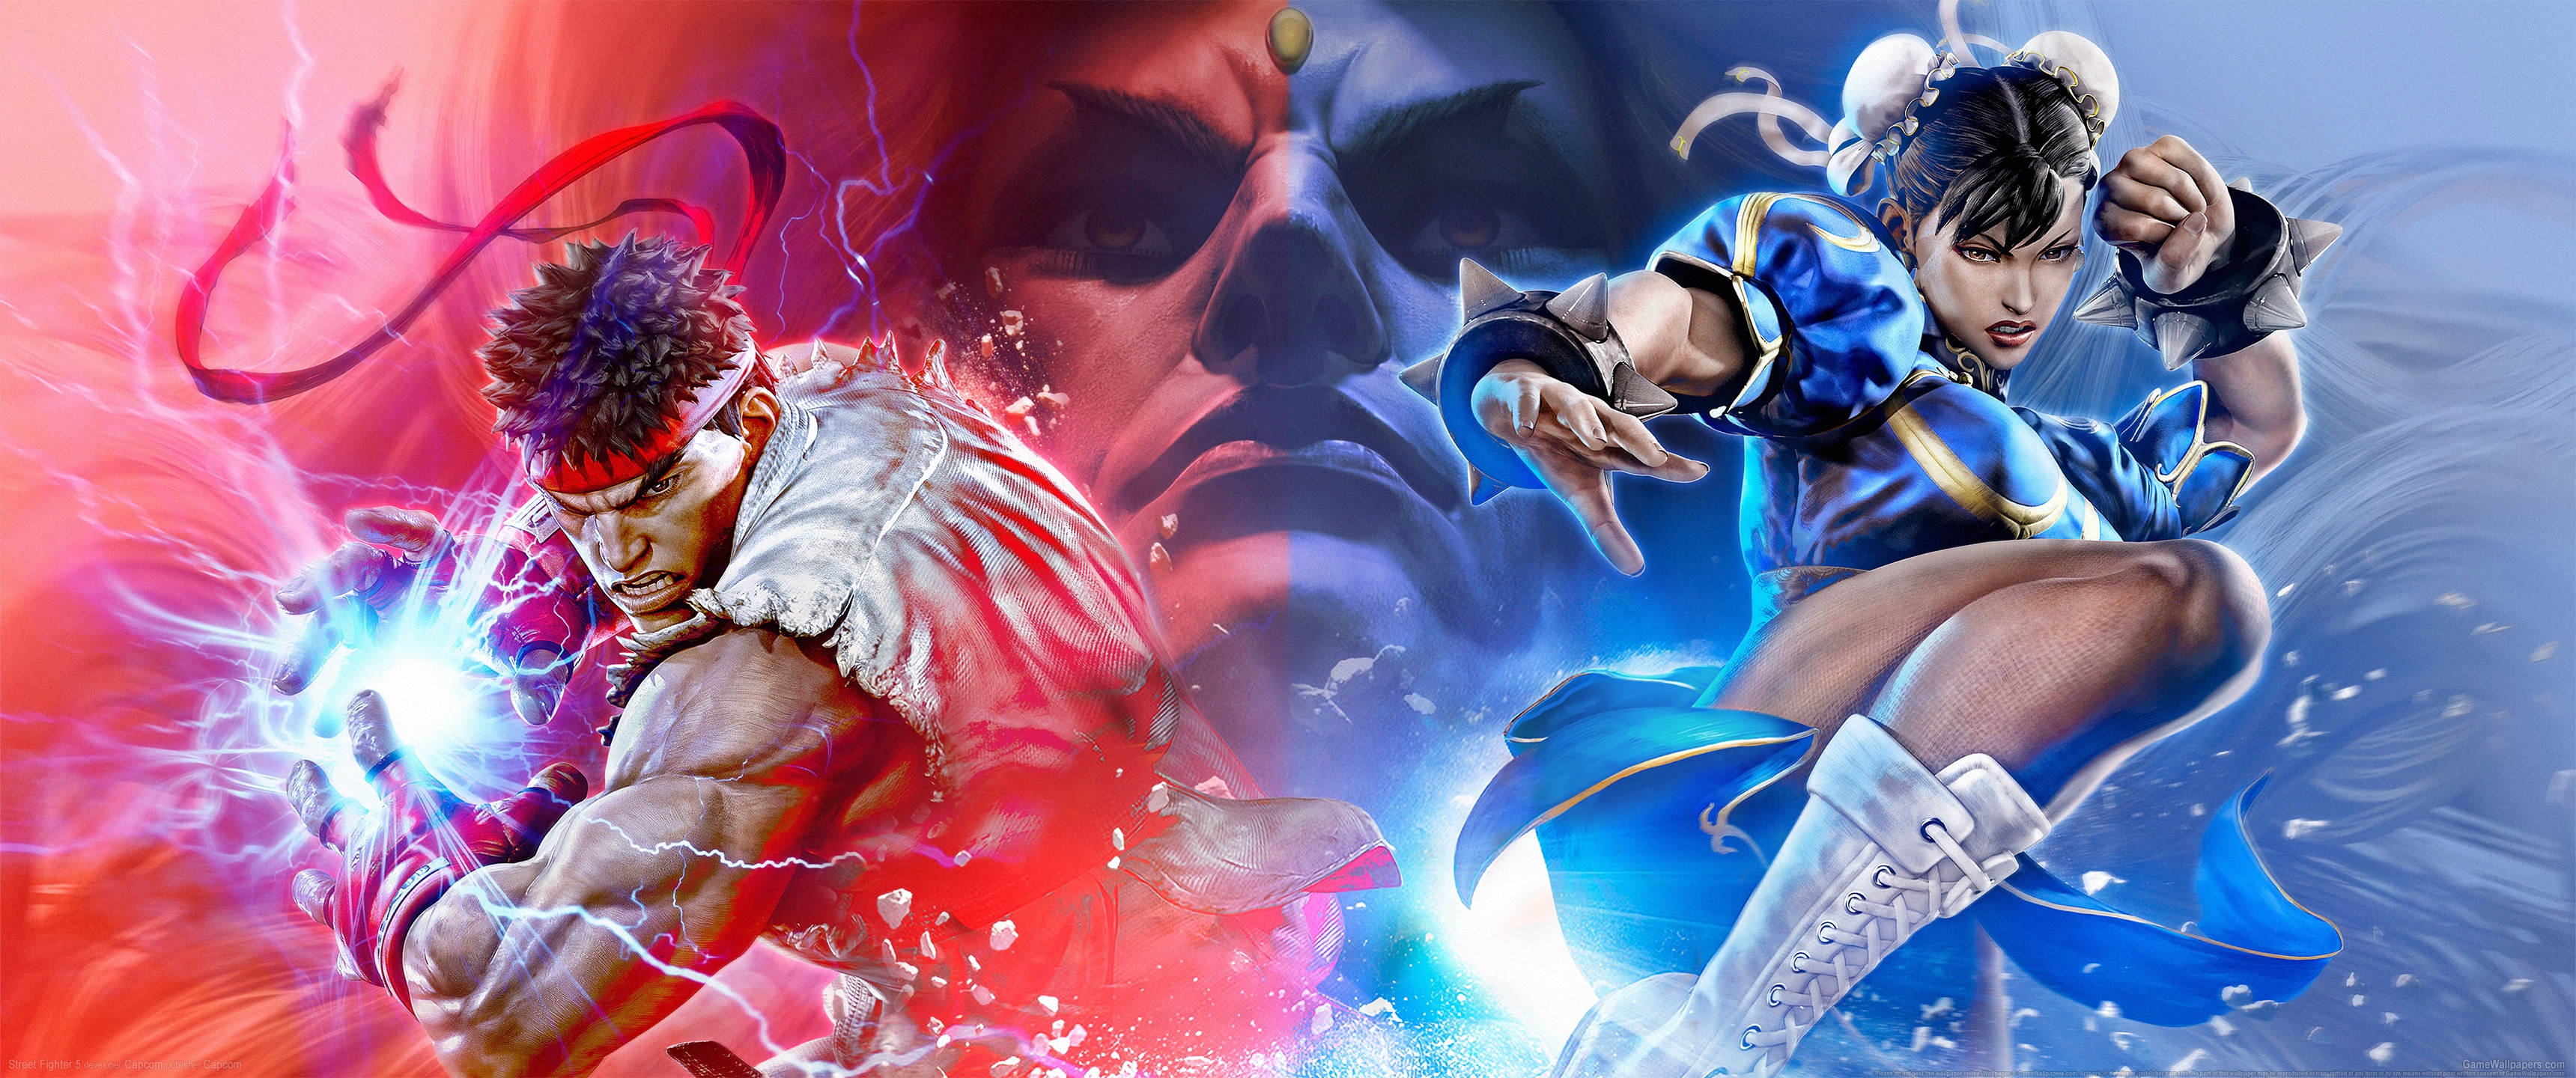 Street Fighter 5 3440x1440 wallpaper or background 08